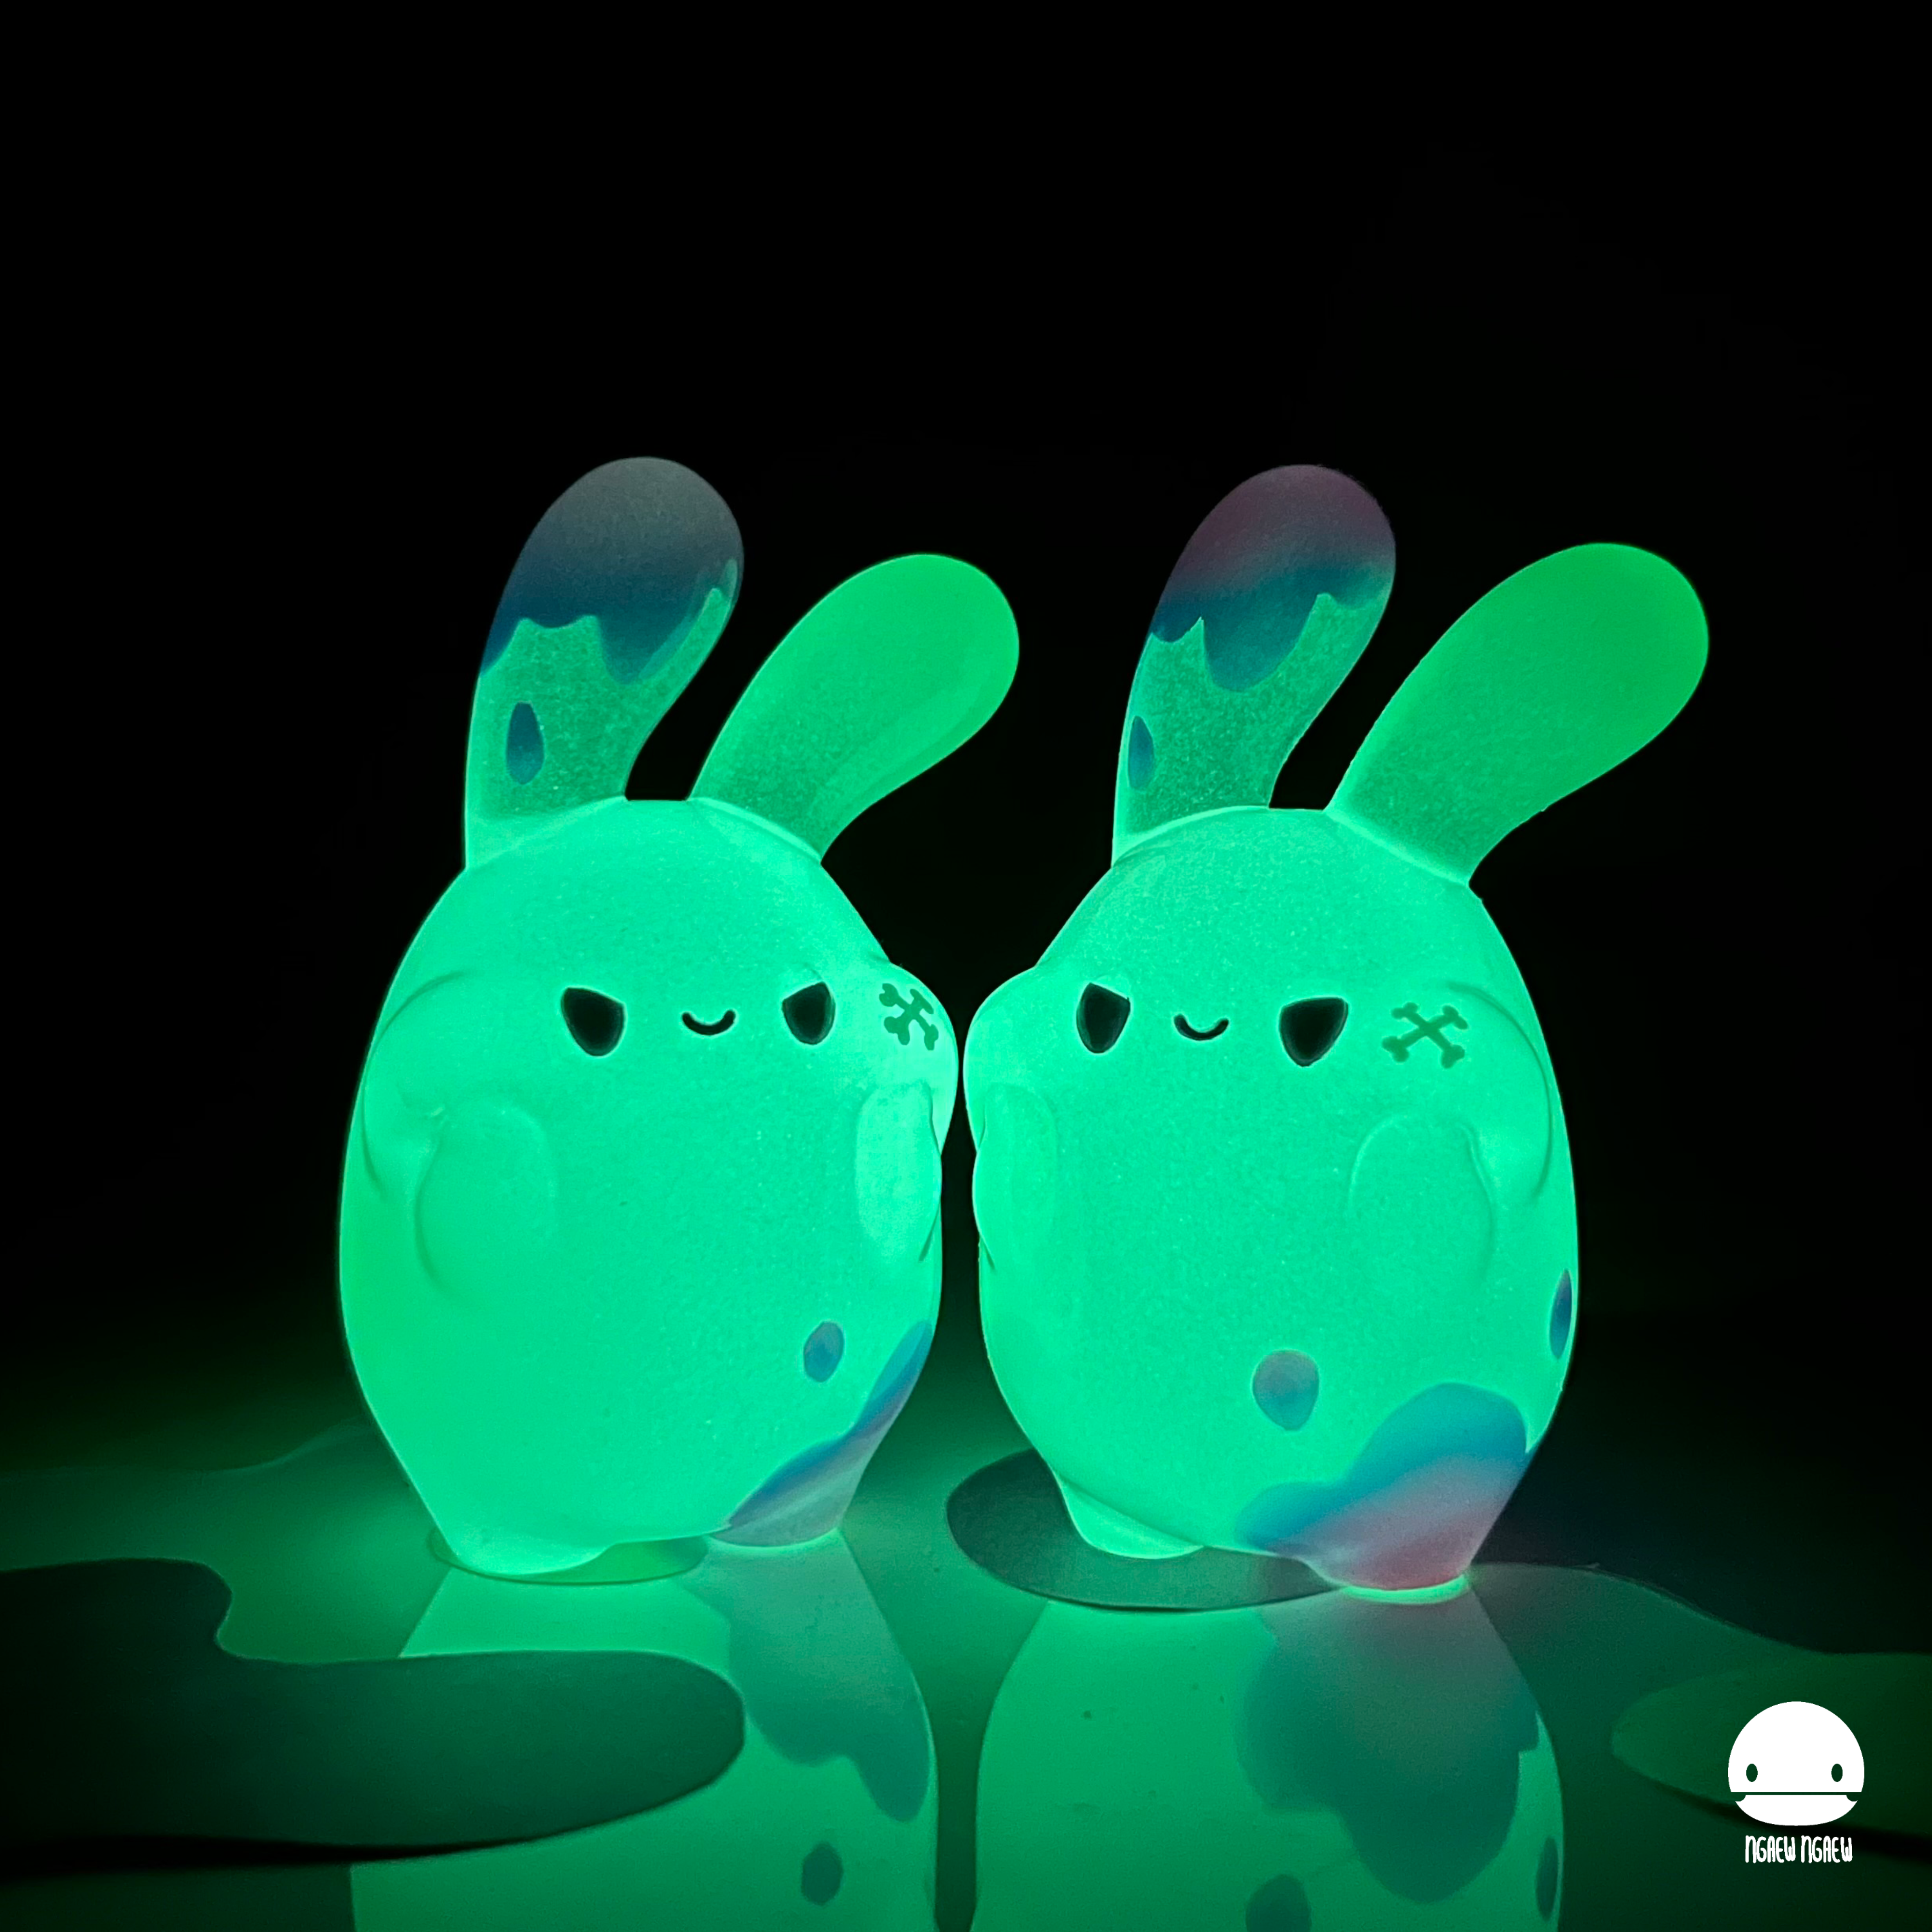 Ngaew ngaew Chubby Bubble(Poison) by Ngaew Ngaew, two glowing toy bunnies, green and purple object, and green balloon in the sky, limited edition preorder from Strangecat Toys.